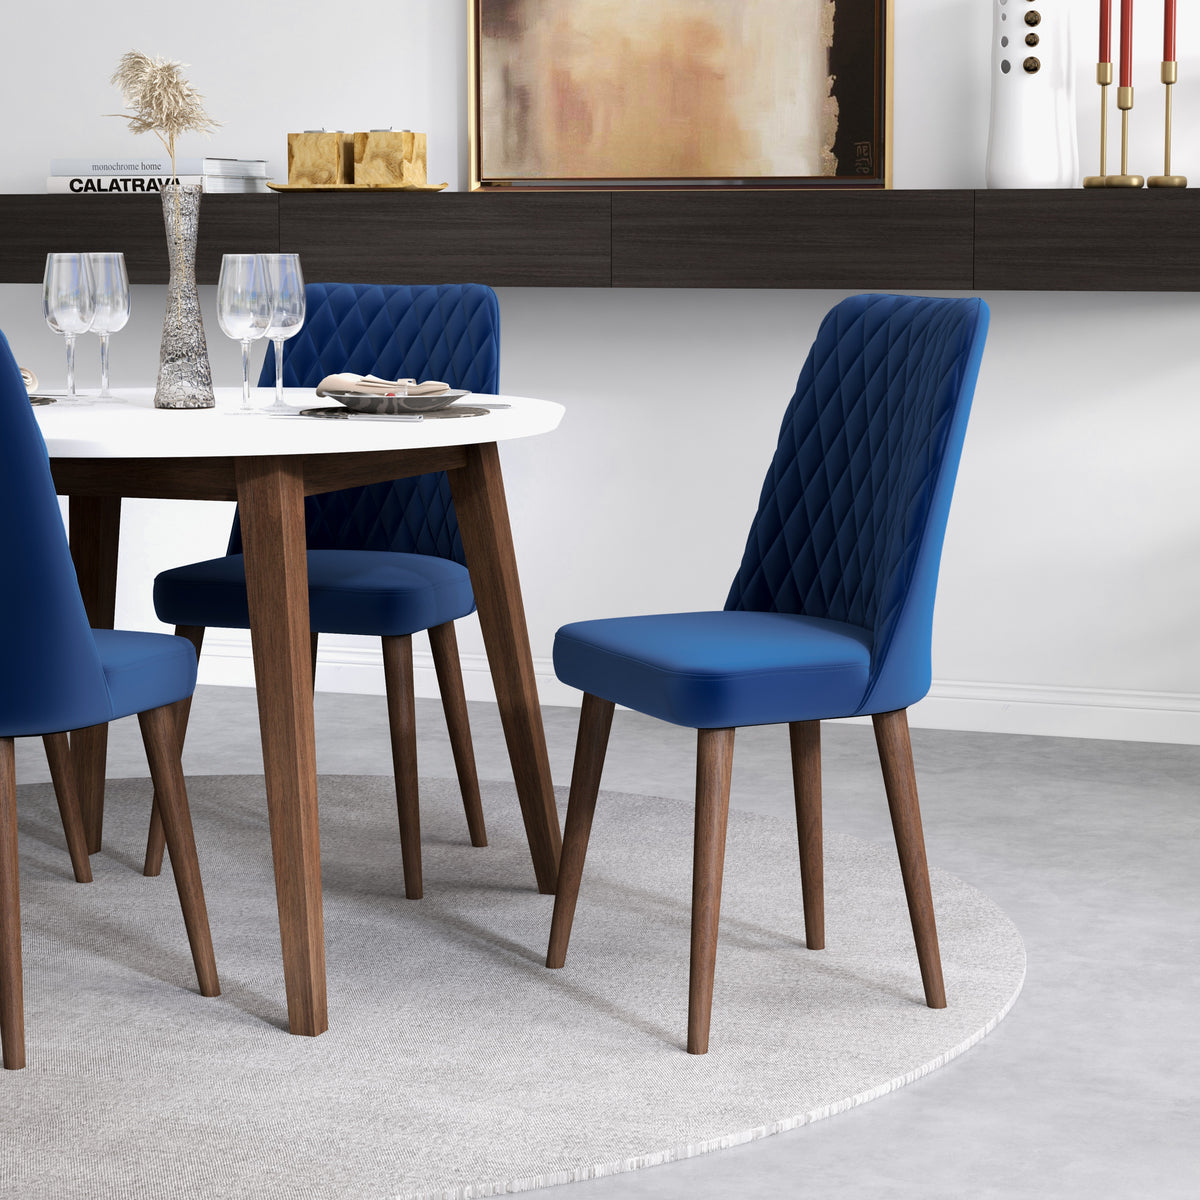 Dining set, Palmer White Table with 4 Evette Blue Dining Chairs | Mid in Mod | Houston TX | Best Furniture stores in Houston